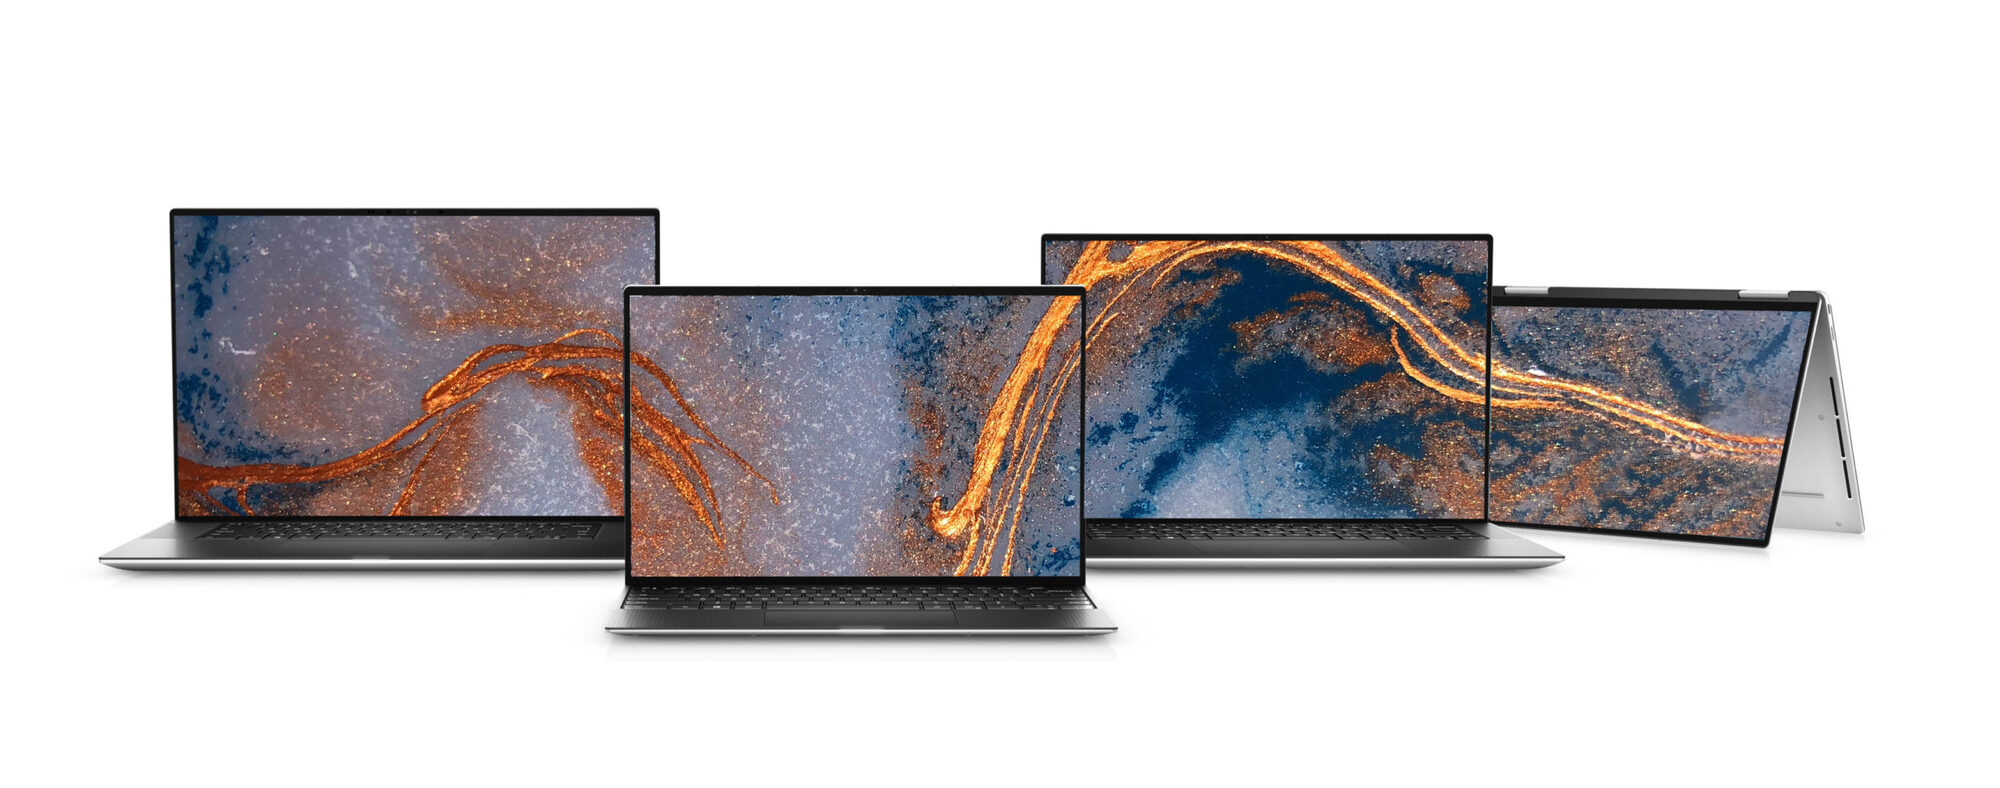 Dell introduces redesigned XPS 15 and XPS 17 586bb1d890b988fa566c9e5c4807cb9c-scaled.jpg